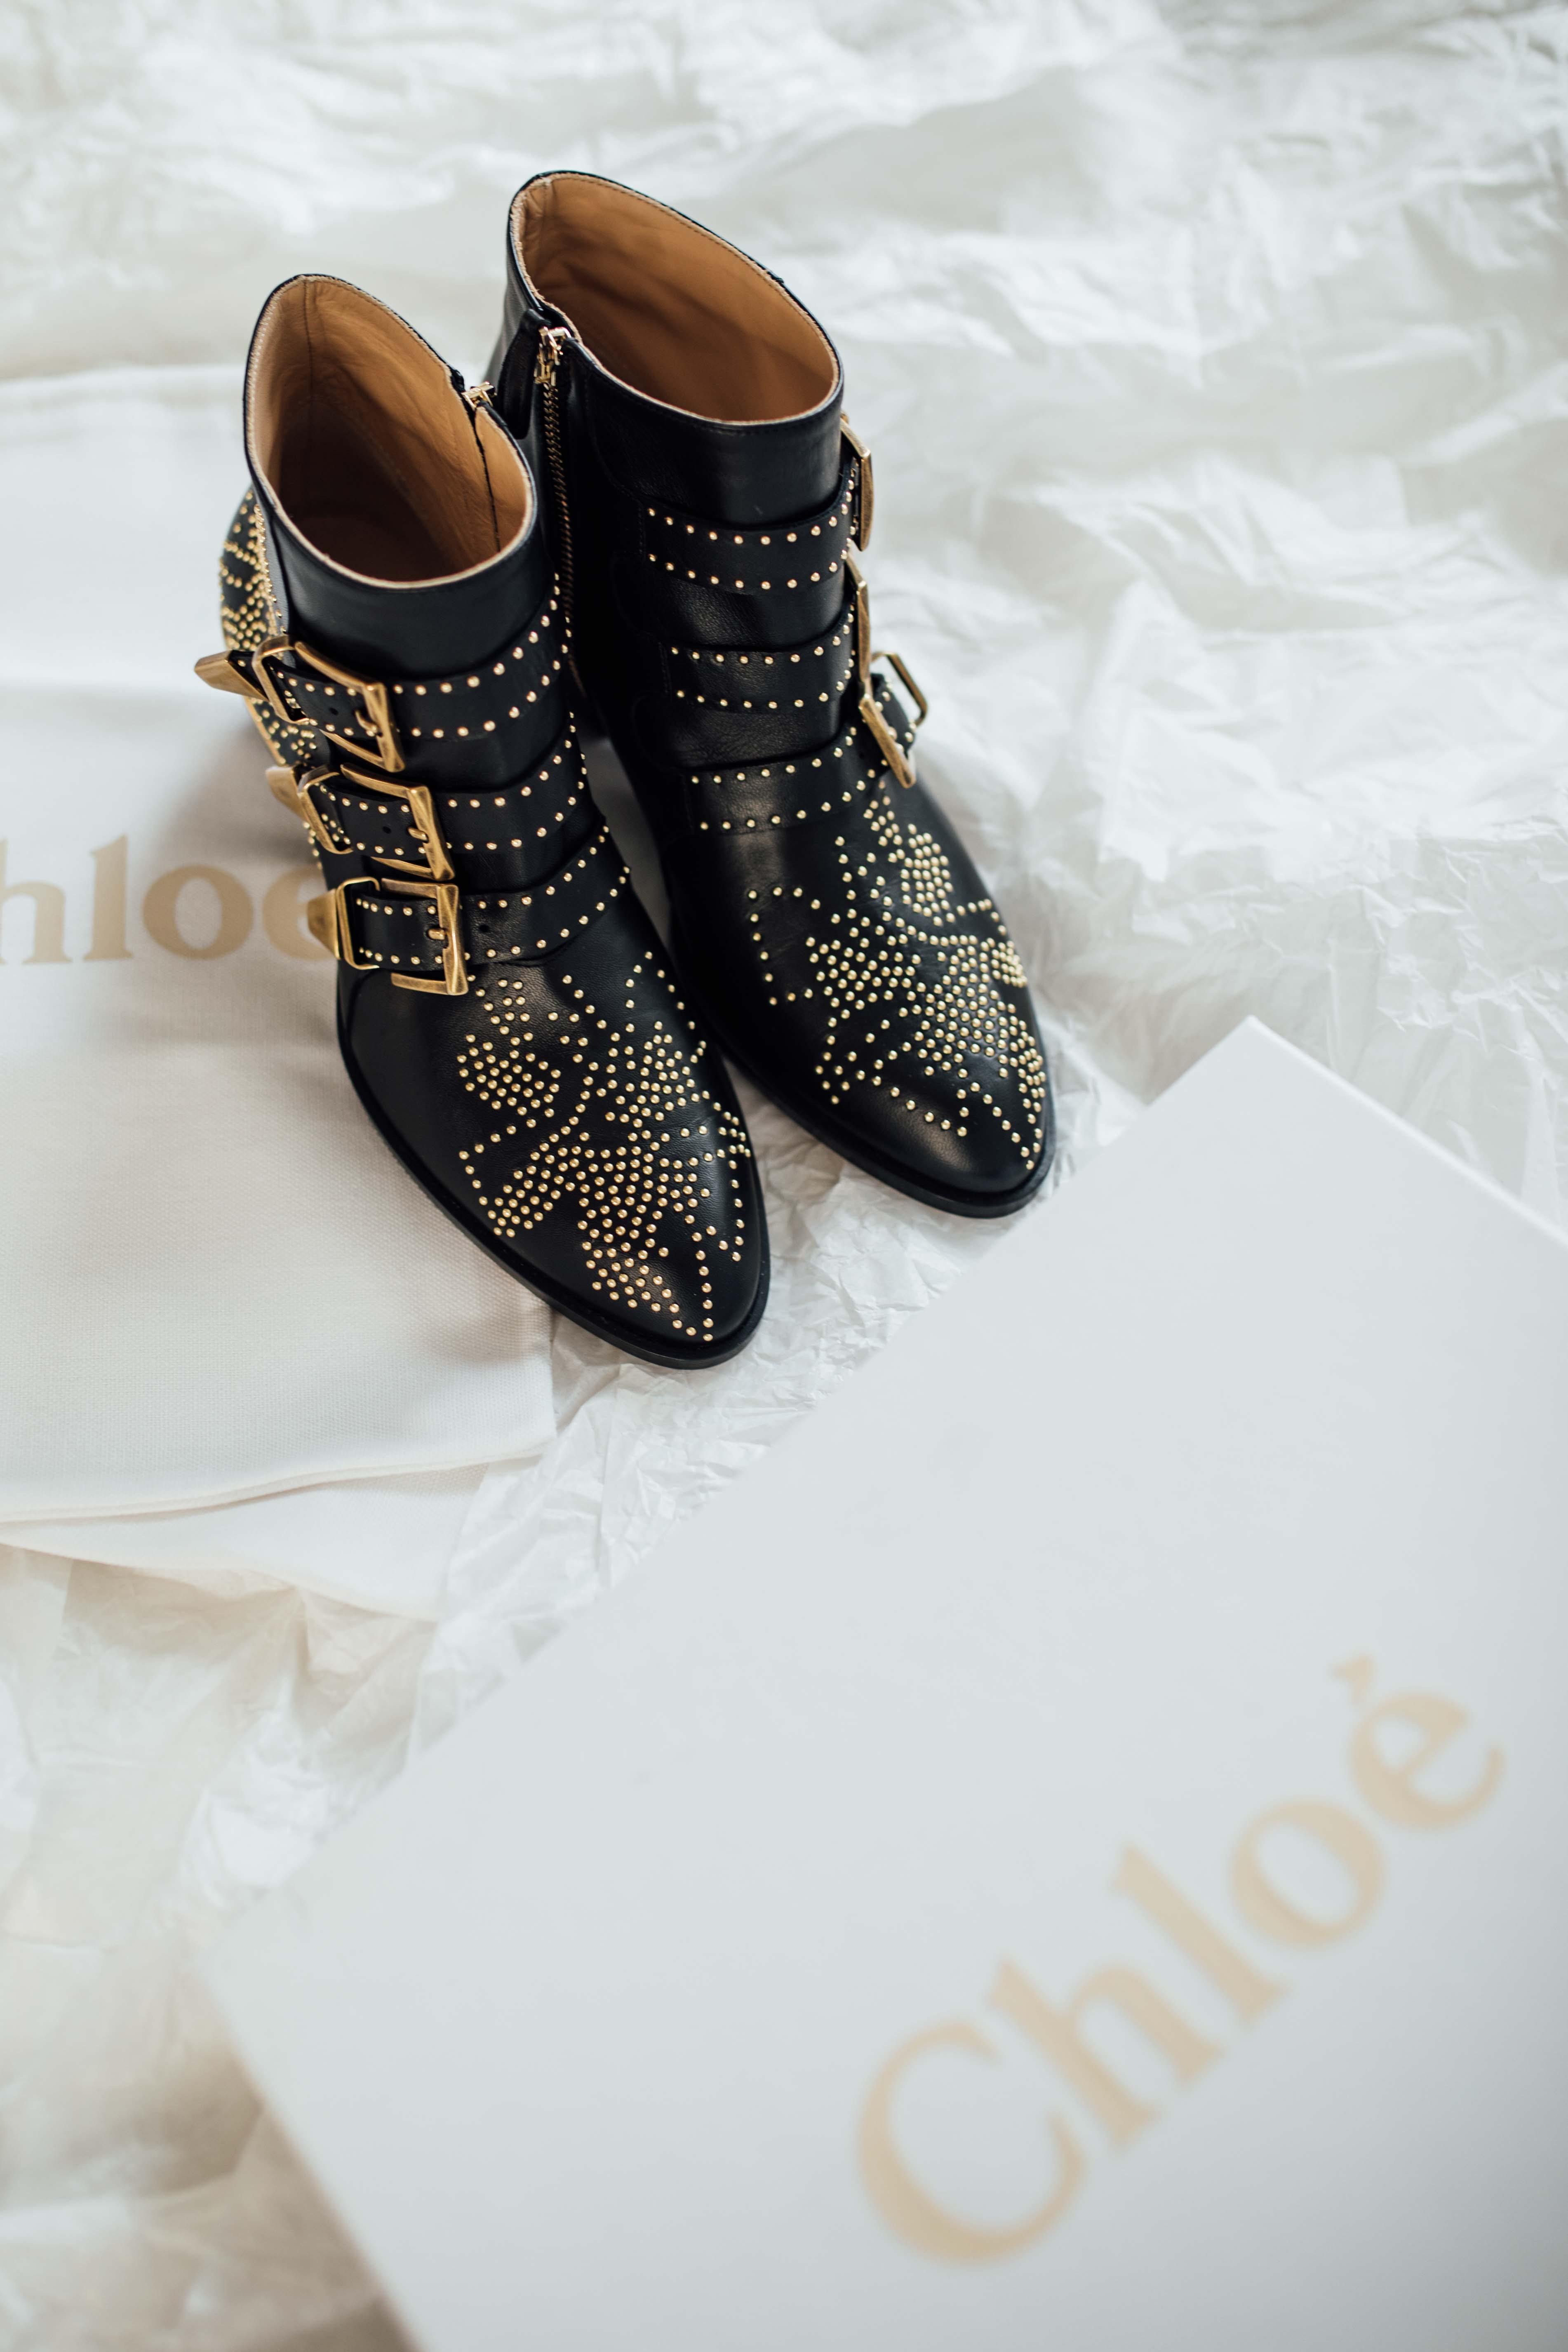 New In: Chloé Susanna Boots | You rock my life